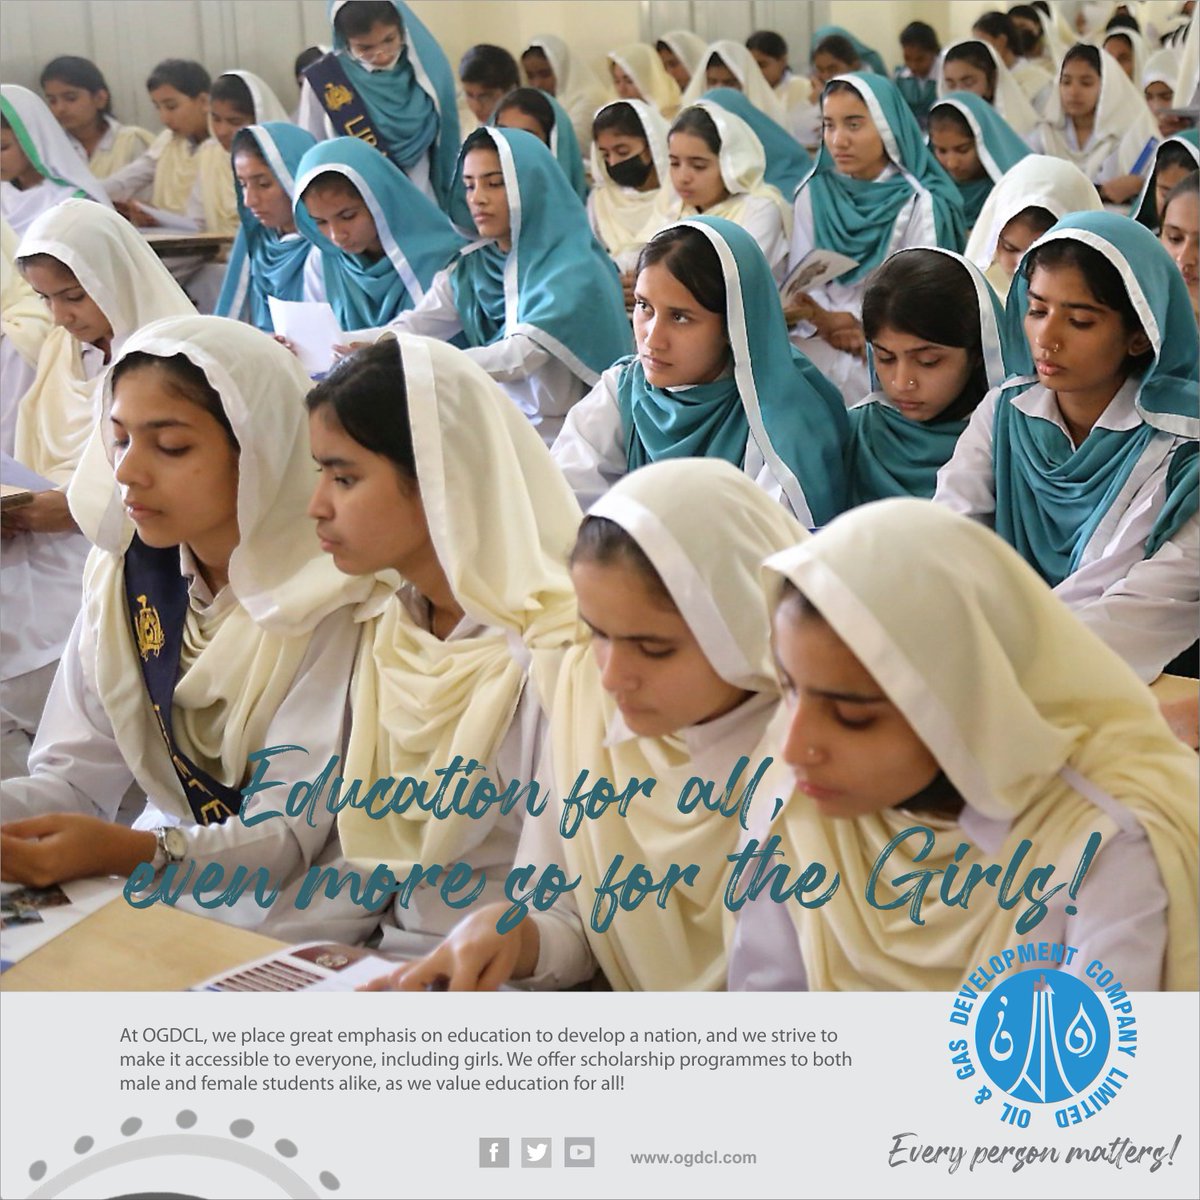 Education knows no boundaries at OGDCL. Our commitment to accessible education knows no gender.  Specially when it comes to girls education, we are deeply committed to breaking barriers.

#educationforall #girlseducationmatters #EveryPersonMatters #EducateToEmpower